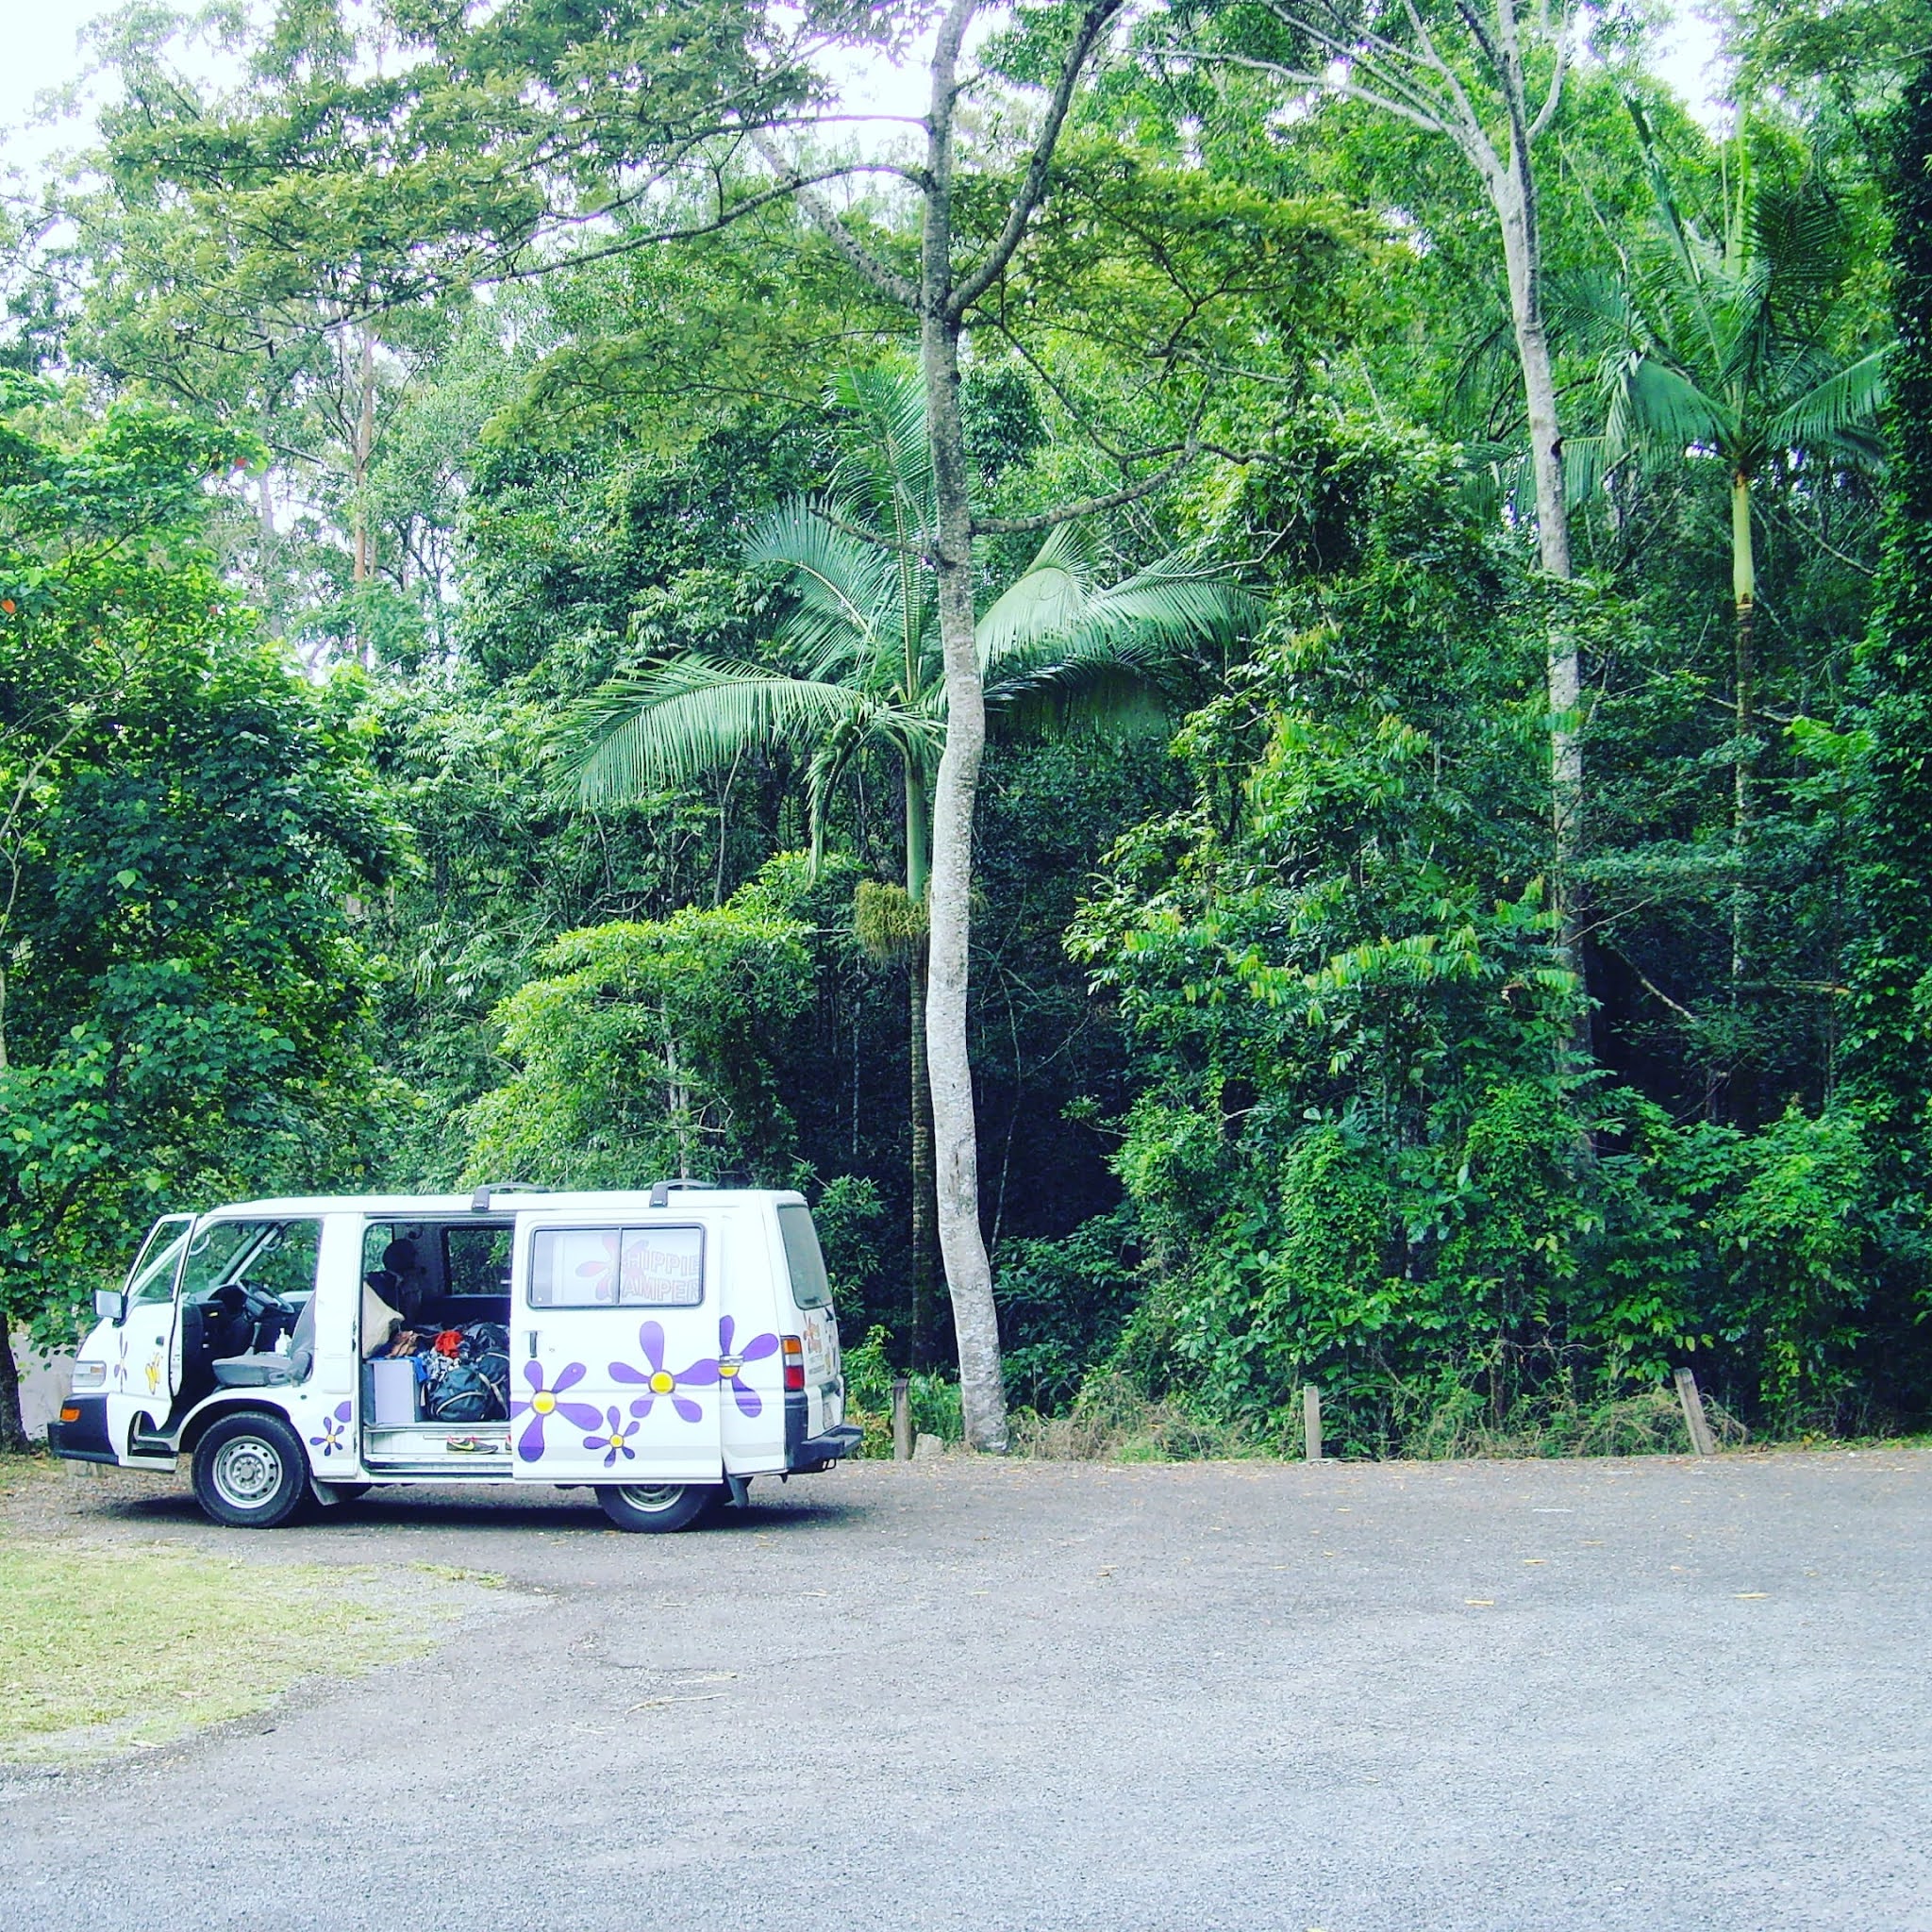 camper van in australia, used to drive from Sydney to Cairns